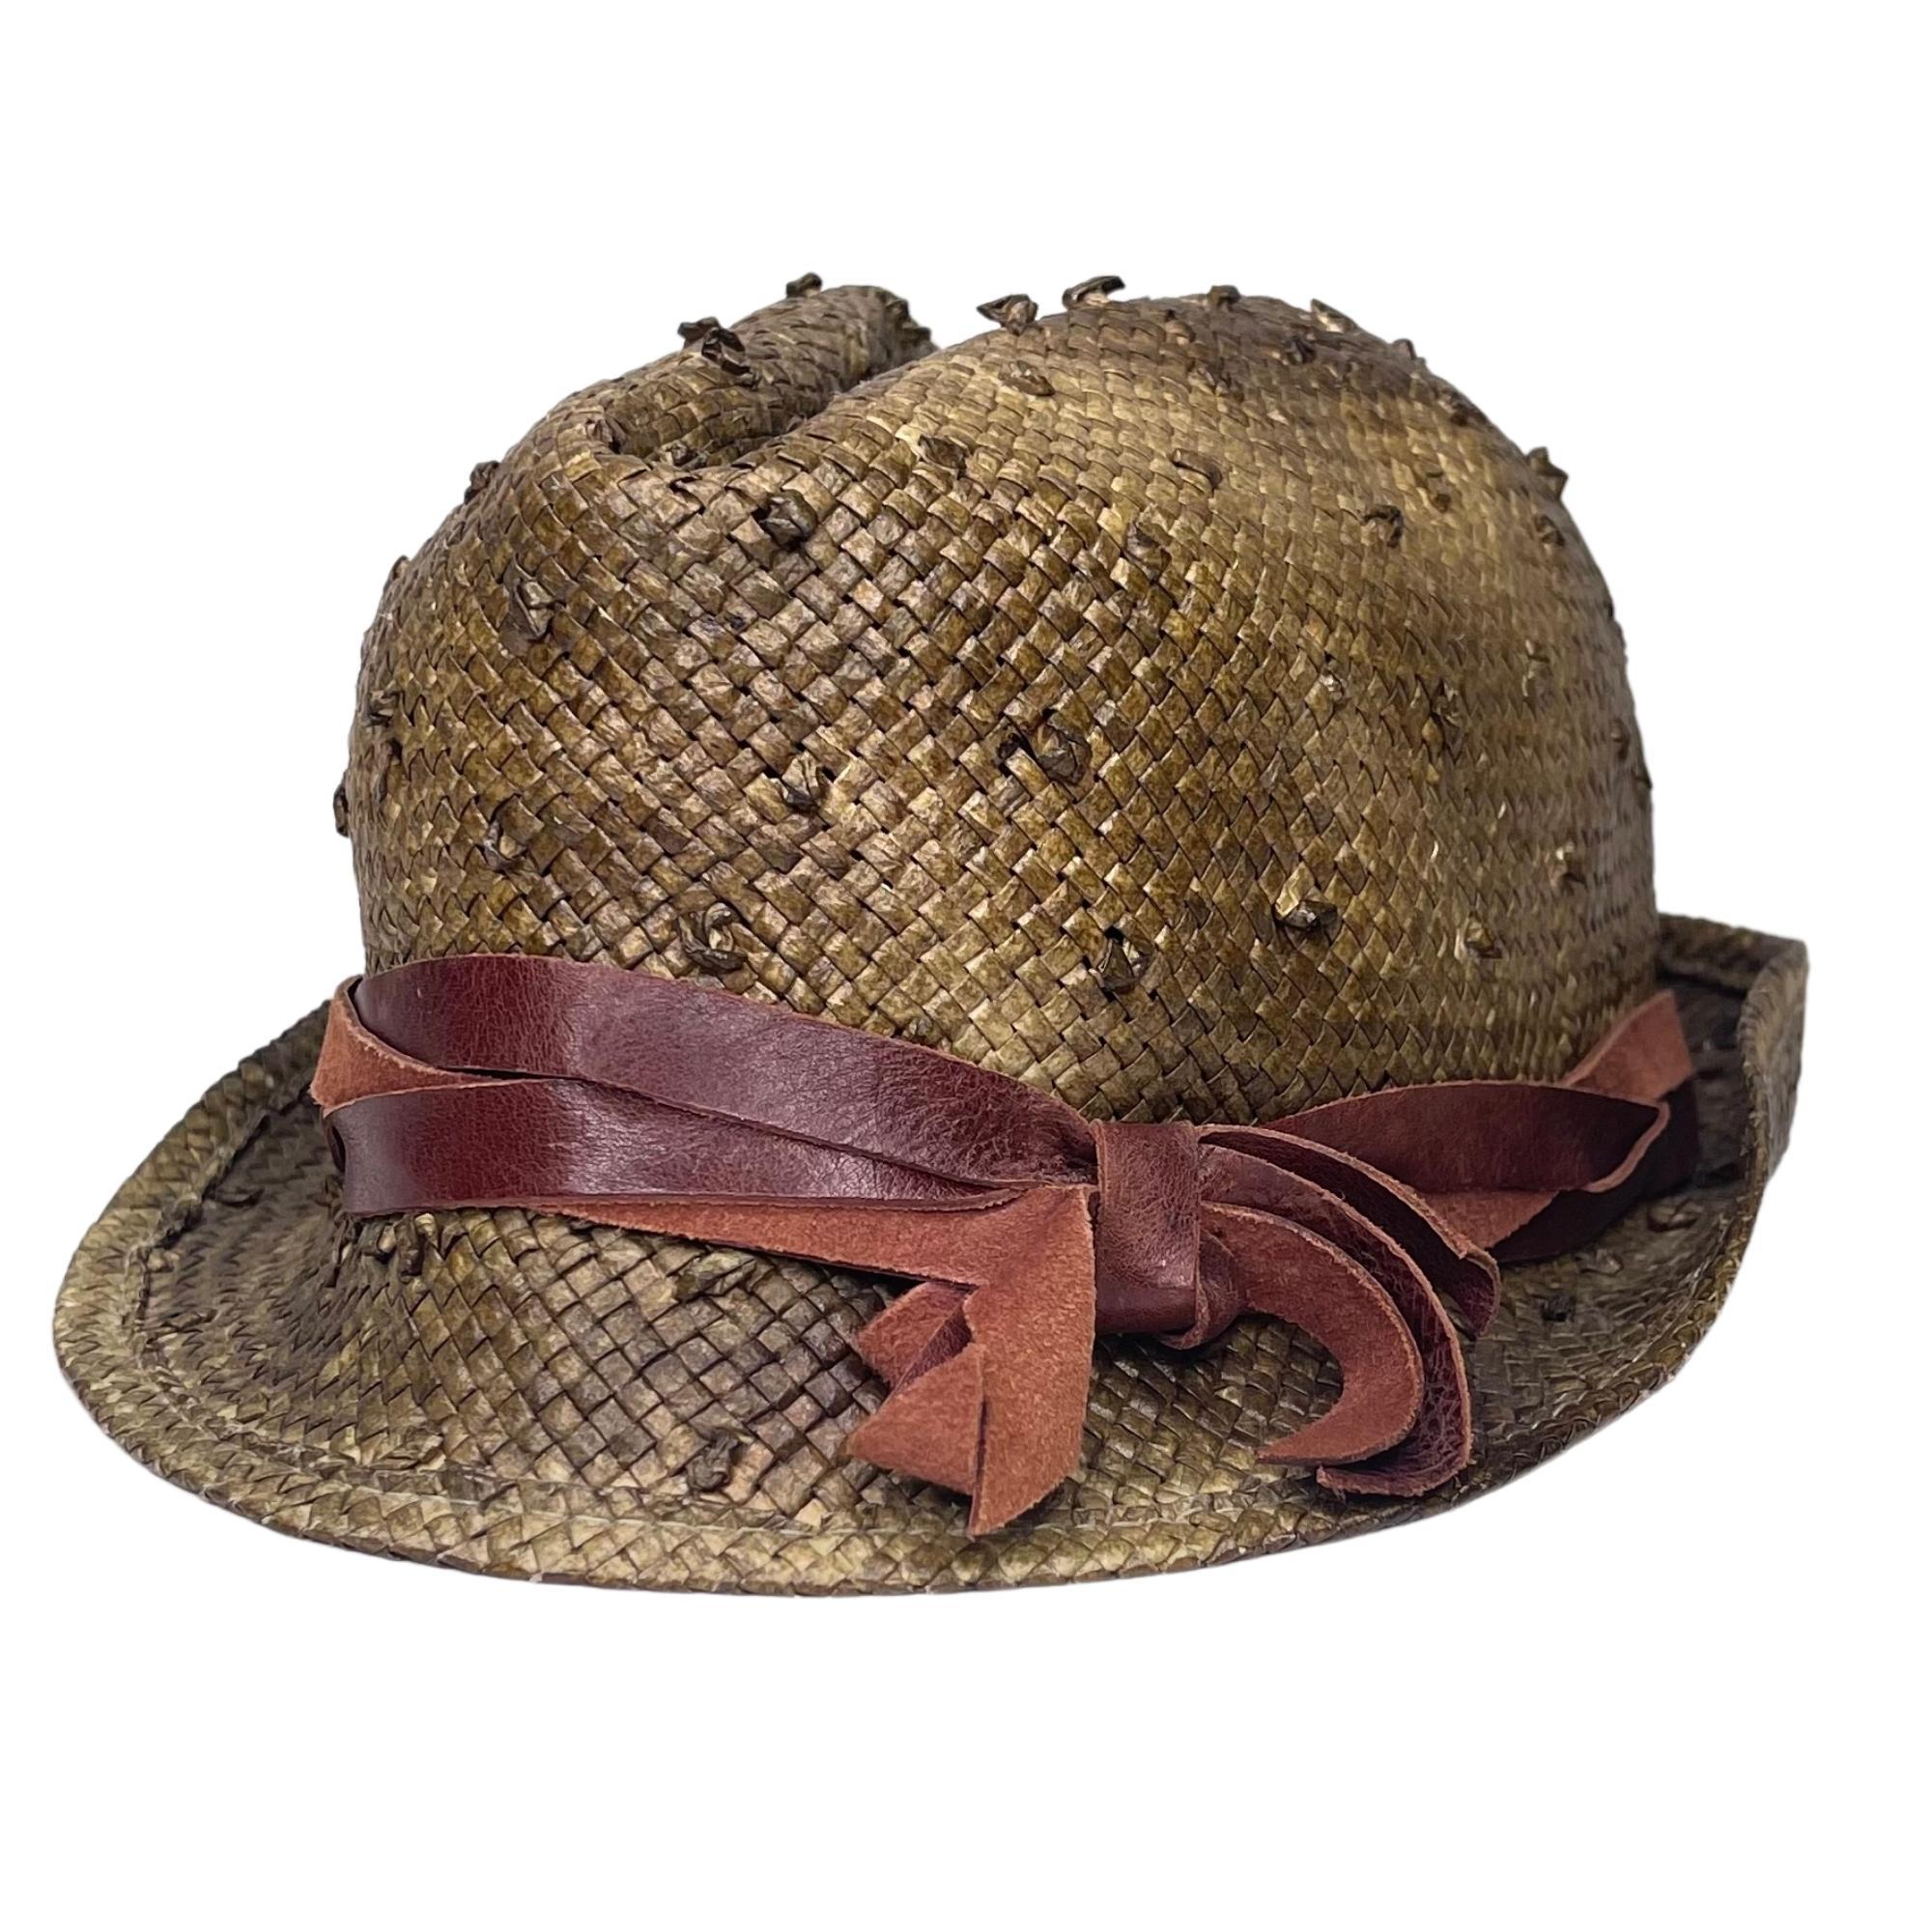 This green hat features marbled shades, woven wicker with a workmanship that resembles ostrich leather and a burgundy band and bow at the top.

COLOR: Green
MATERIAL: Wicker
SIZE: Medium
CONDITION: Good - color fading on the underside of hat, light